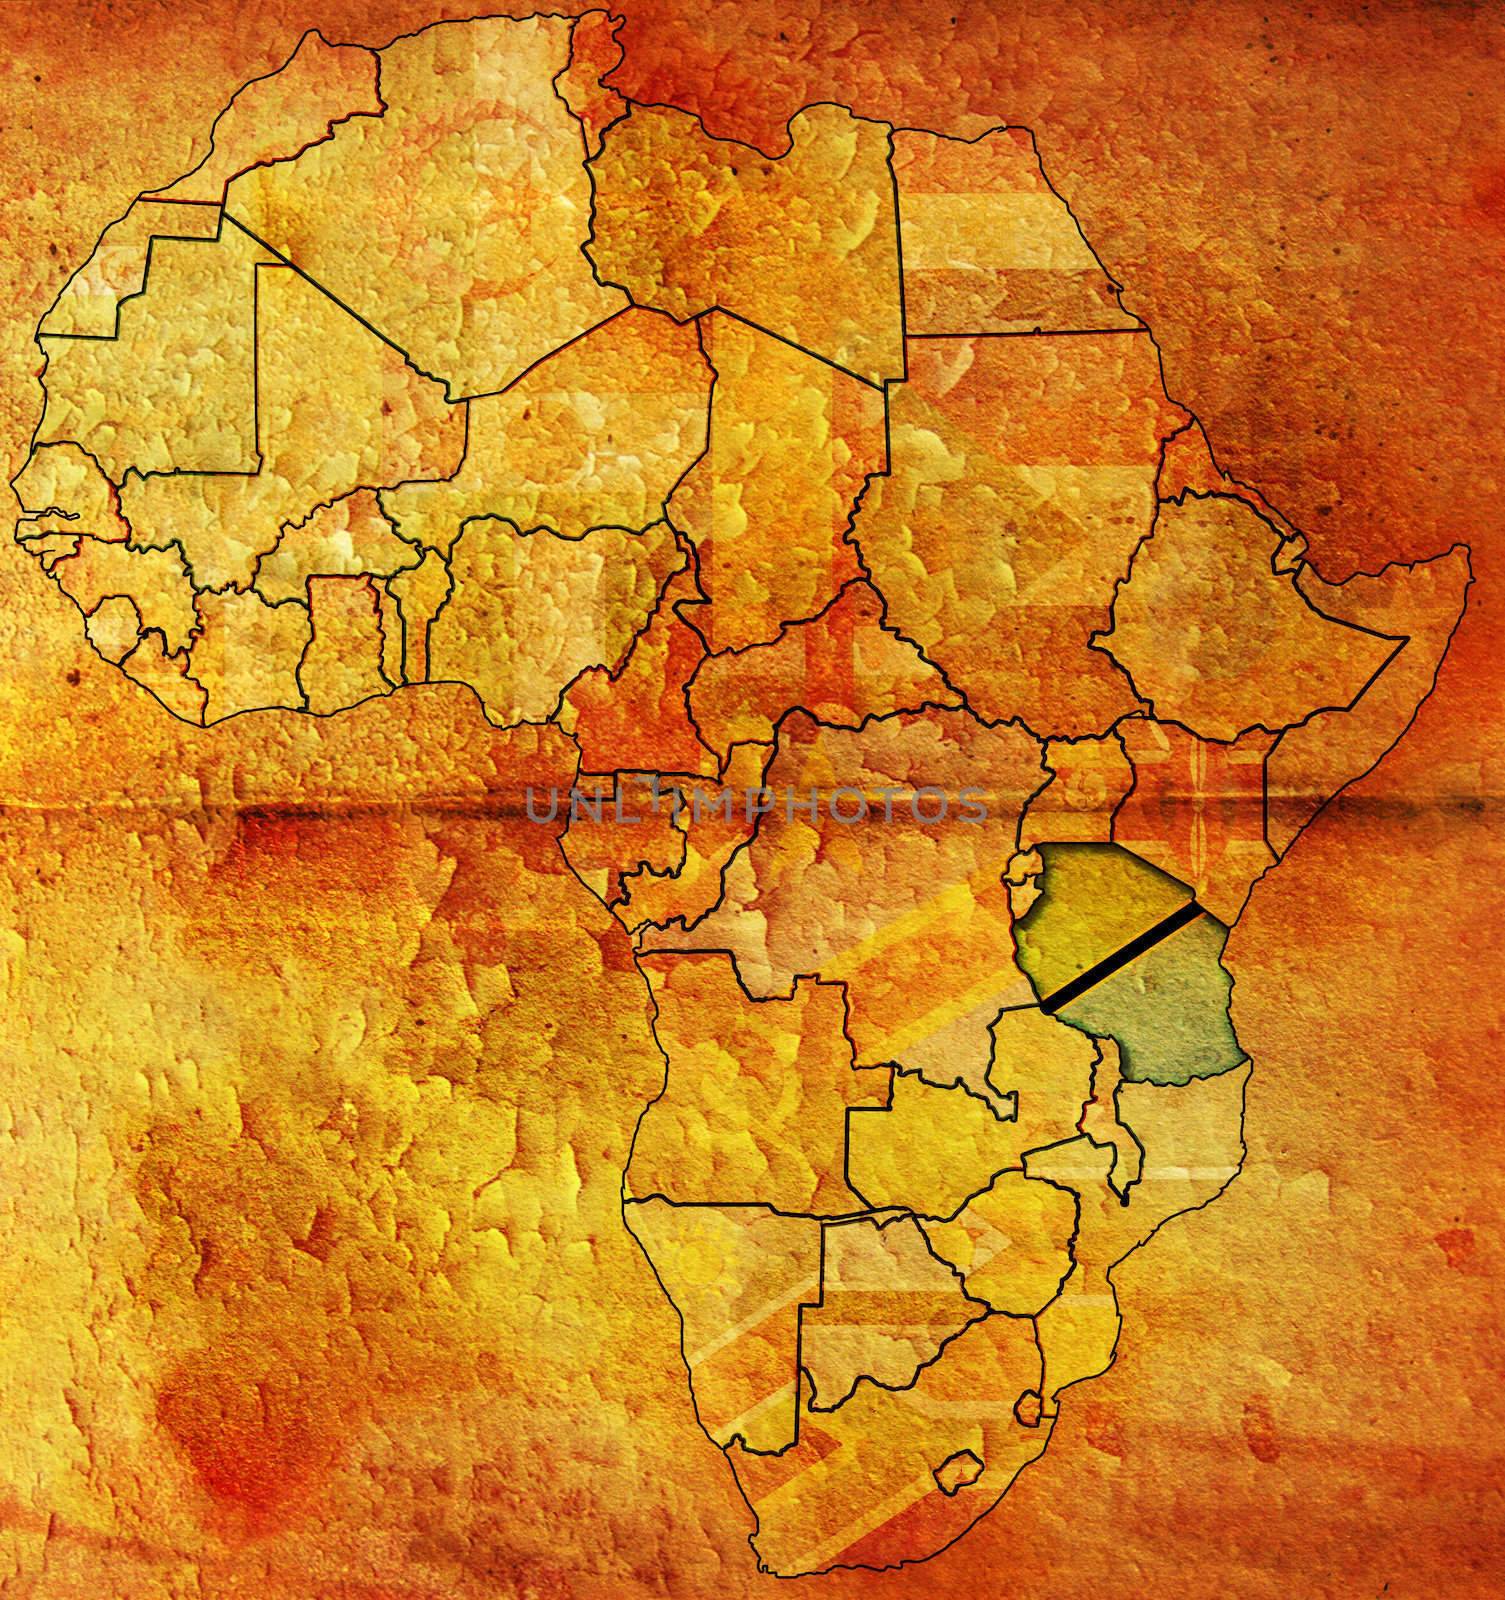 tanzania on africa map by michal812